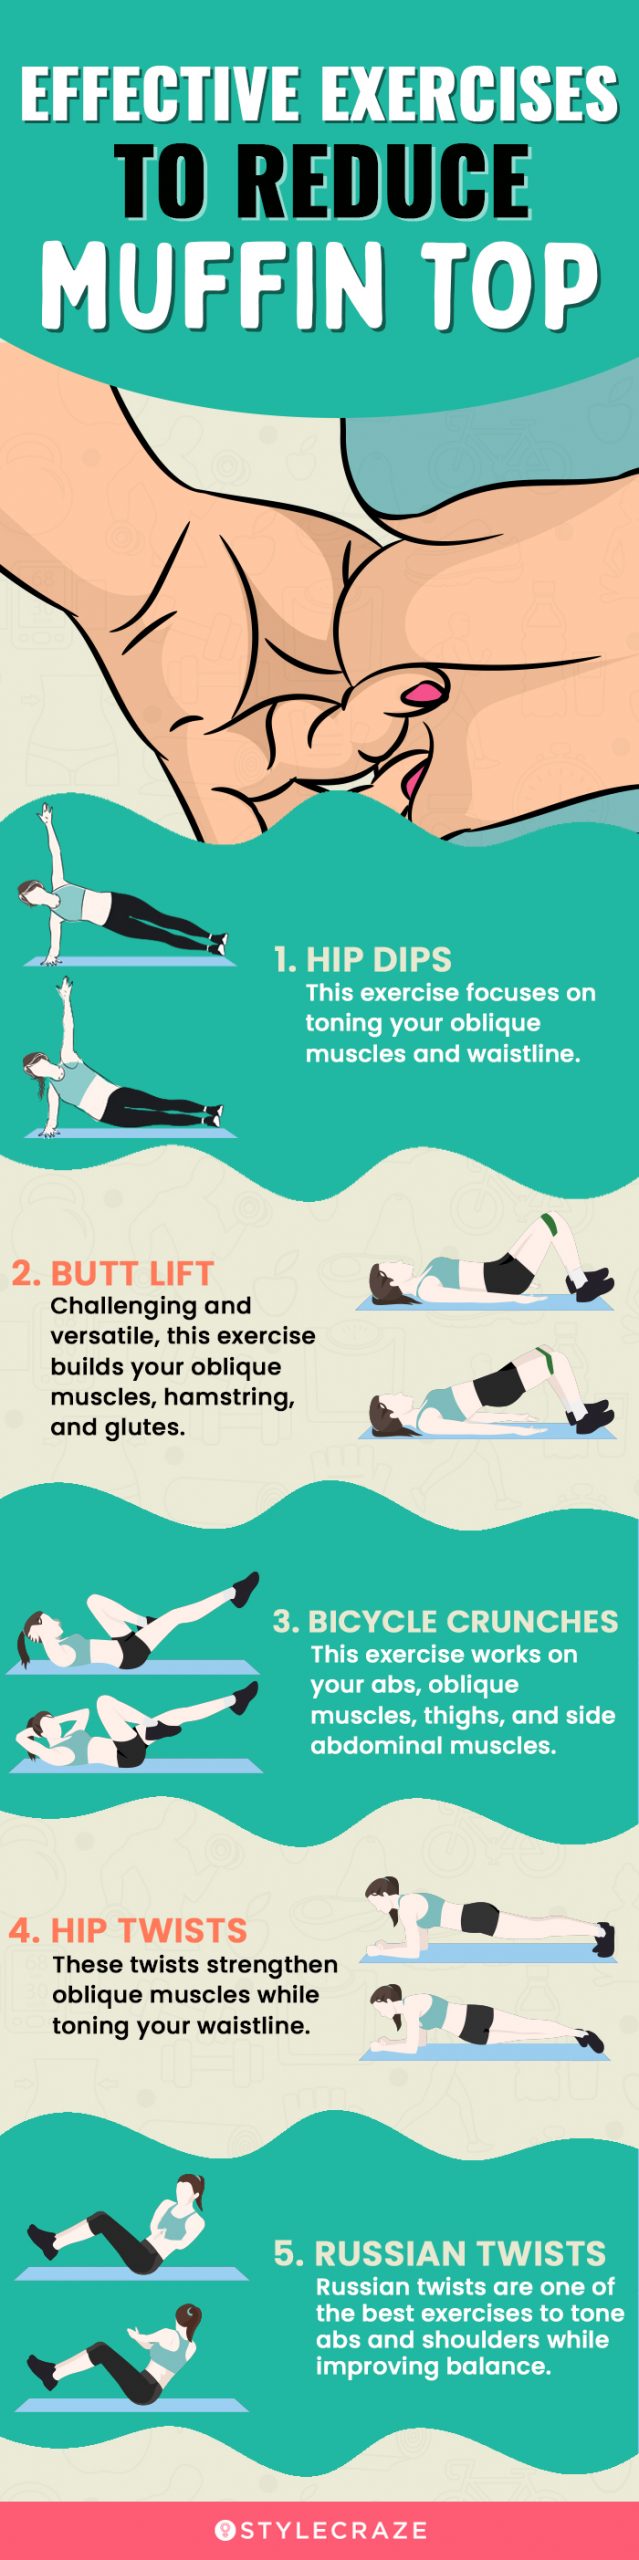 effective exercises to reduce muffin top (infographic)